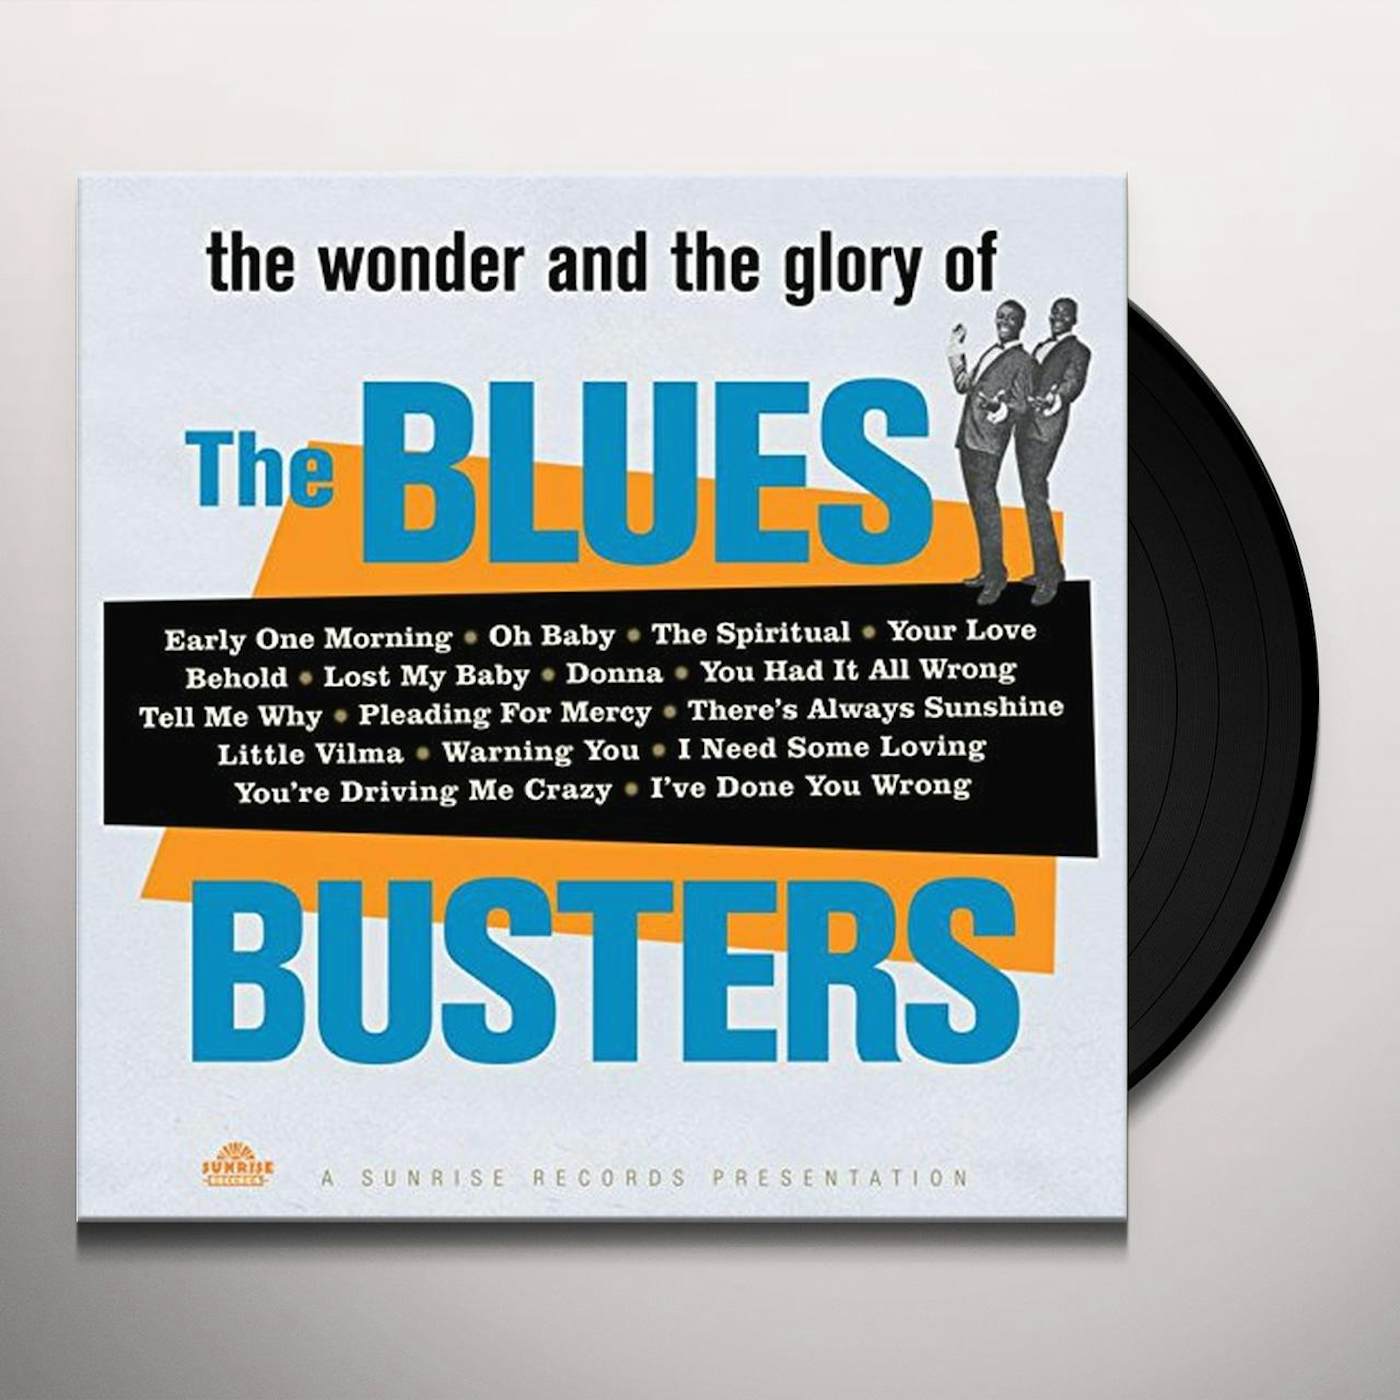 WONDER & GLORY OF THE BLUES BUSTERS CD